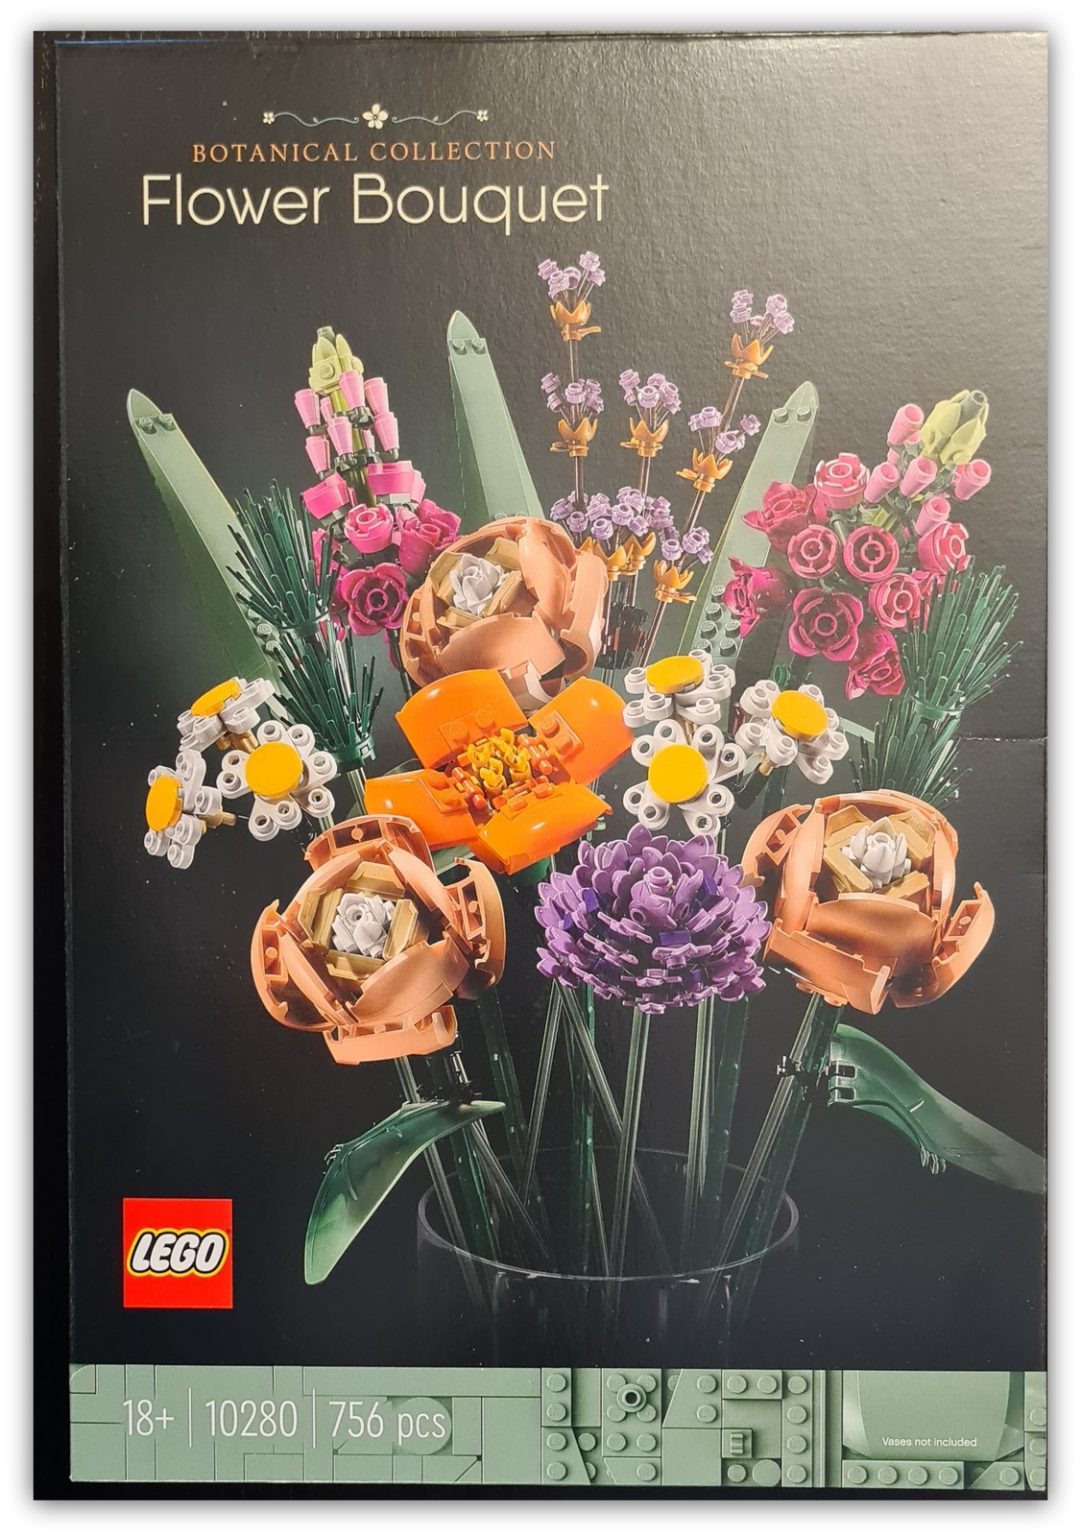 Saying It With Flowers: The New LEGO Botanical Collection